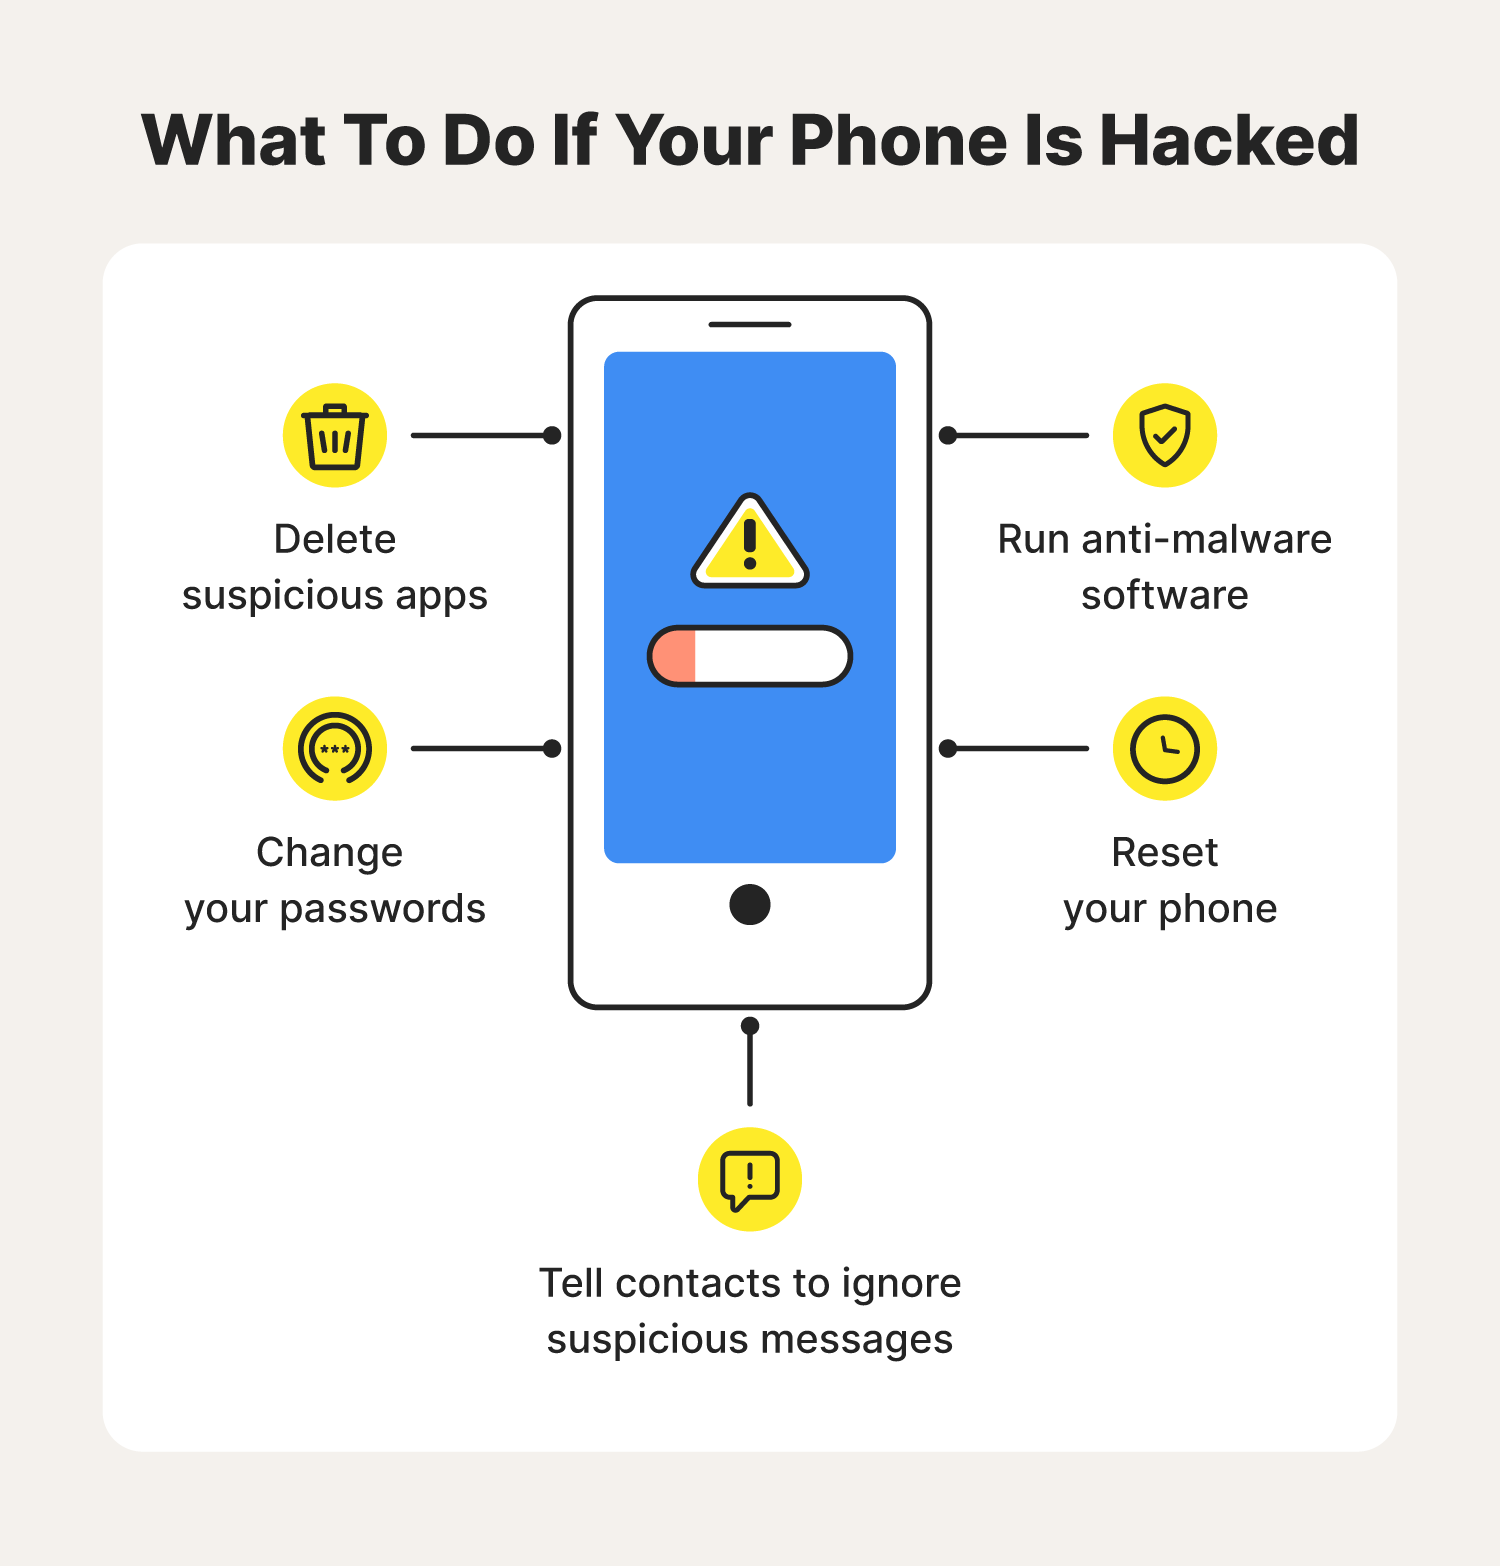 Accor sessie plank How can I tell if my phone has been hacked? | NortonLifeLock